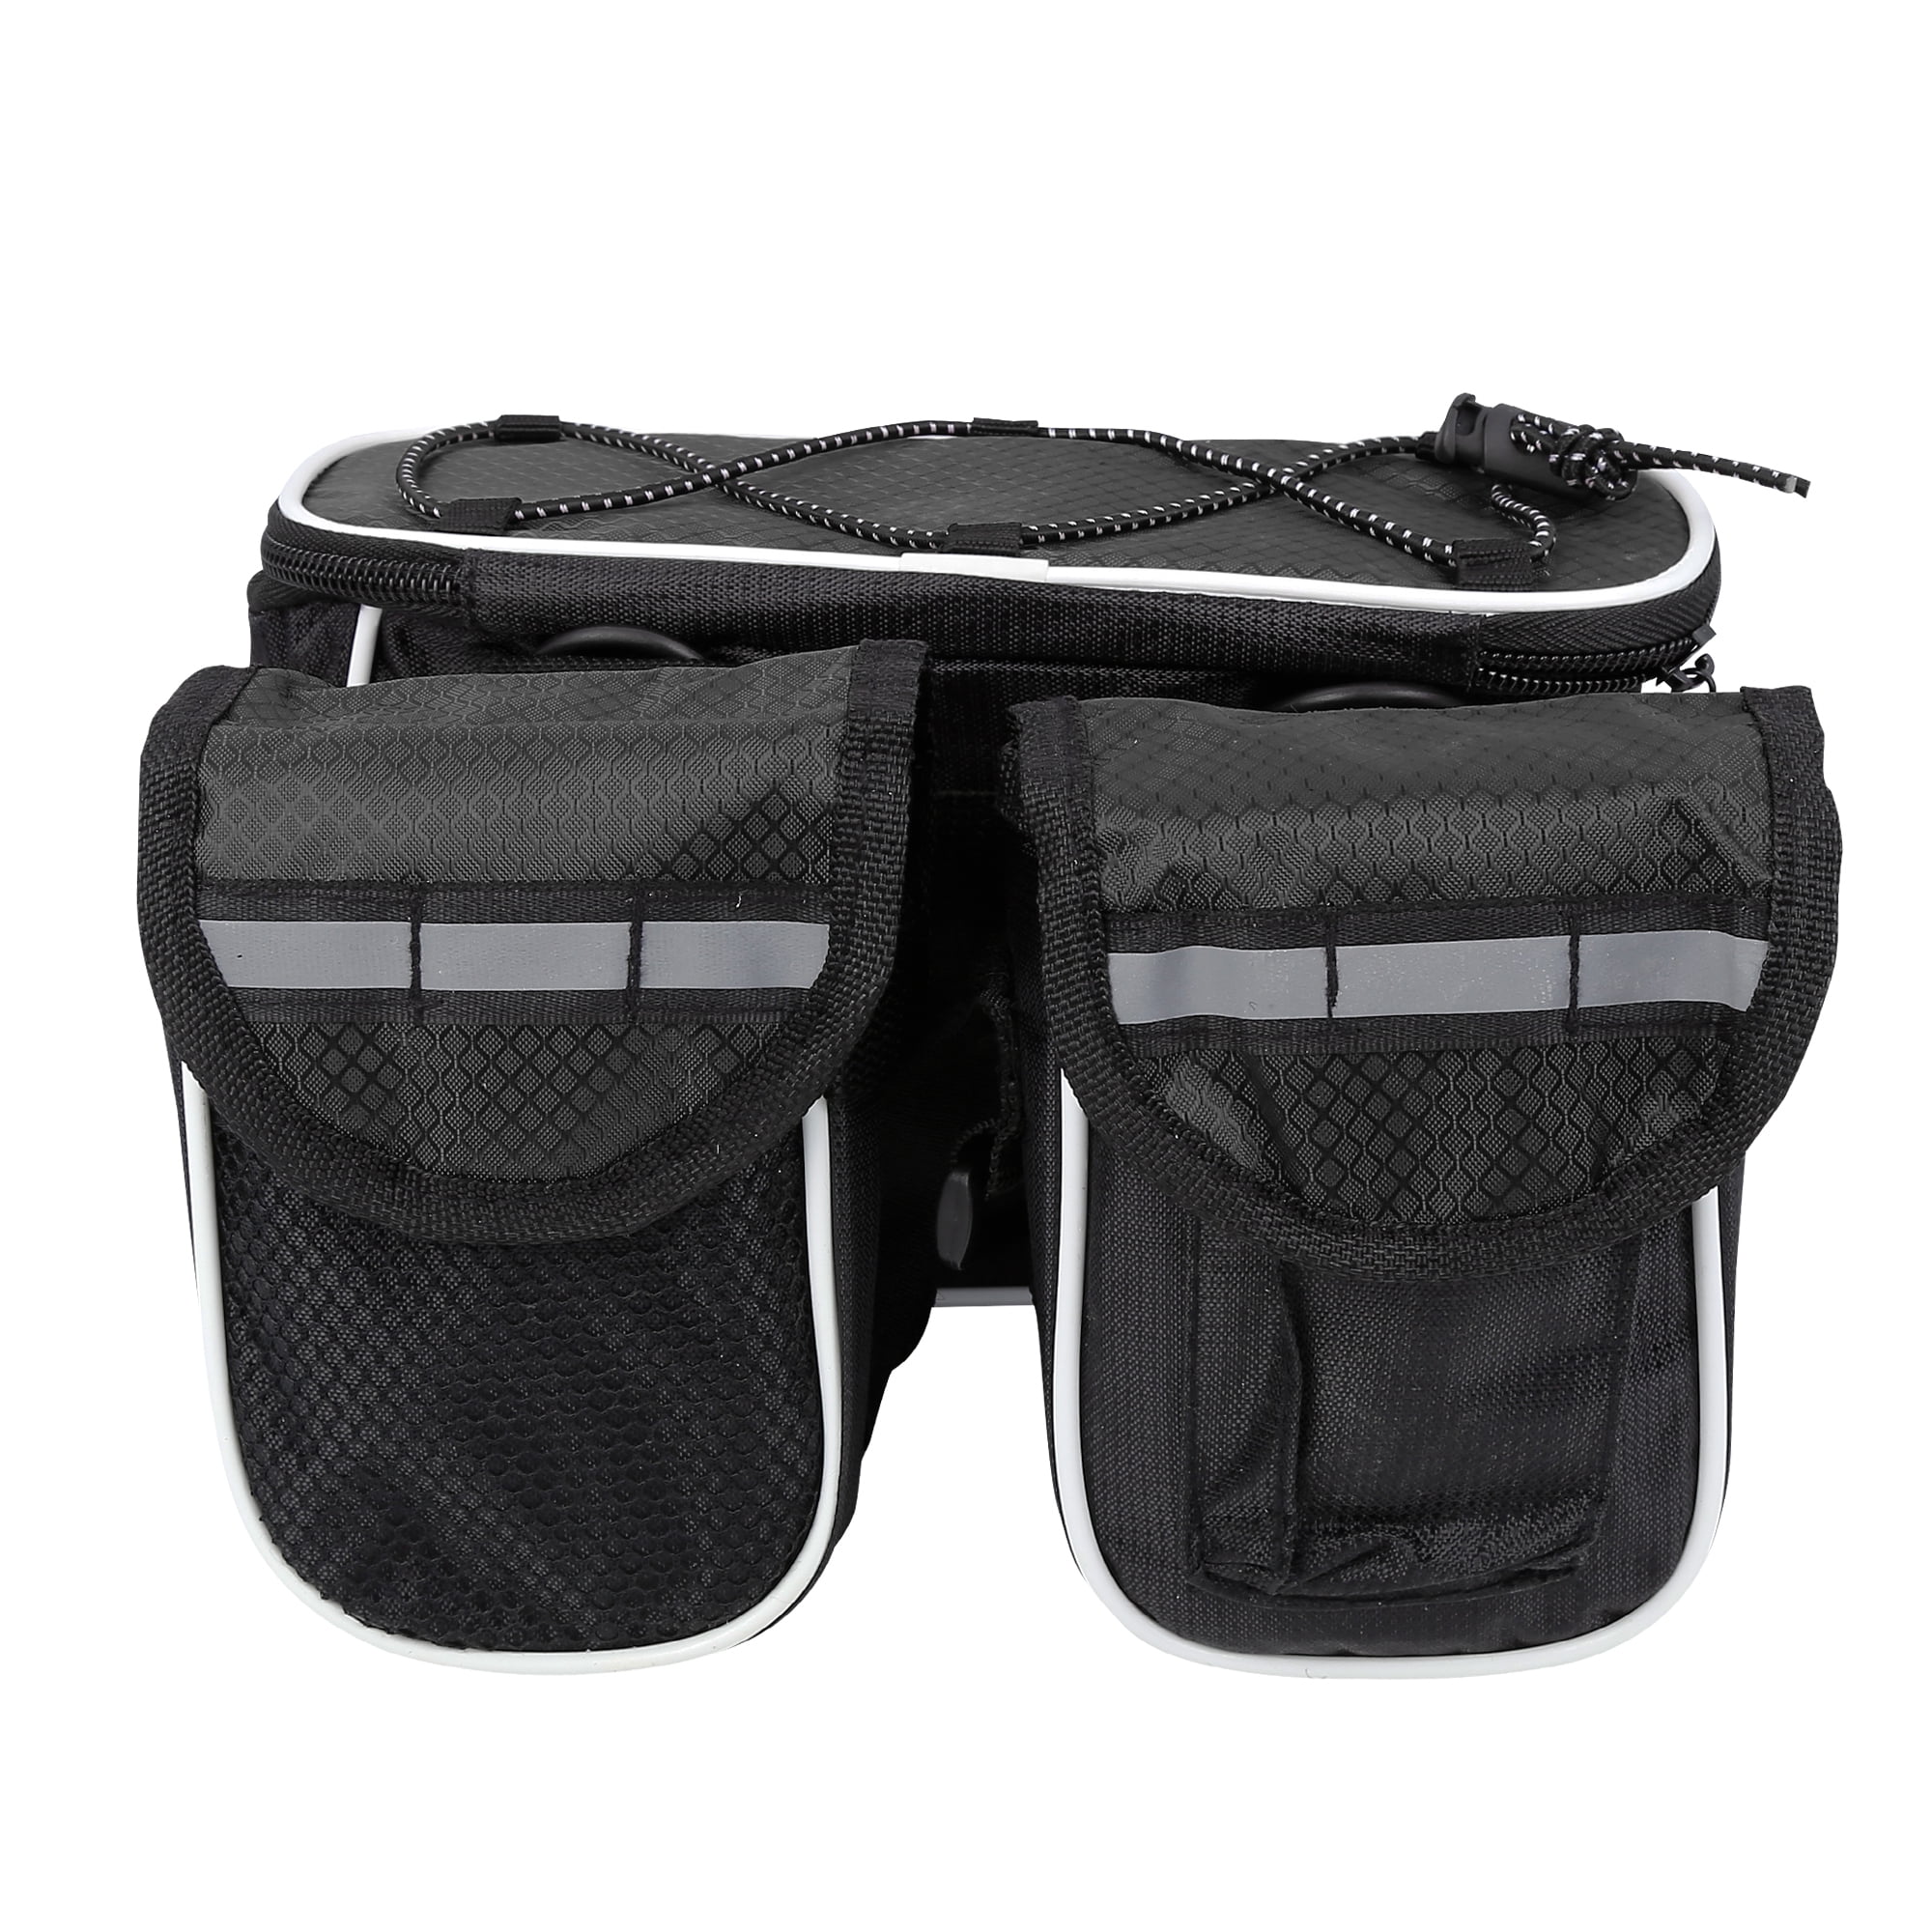 show original title Details about   Bicycle Bag Frame Pouch Saddle Bag Tool Bag Waterproof Shockproof New 